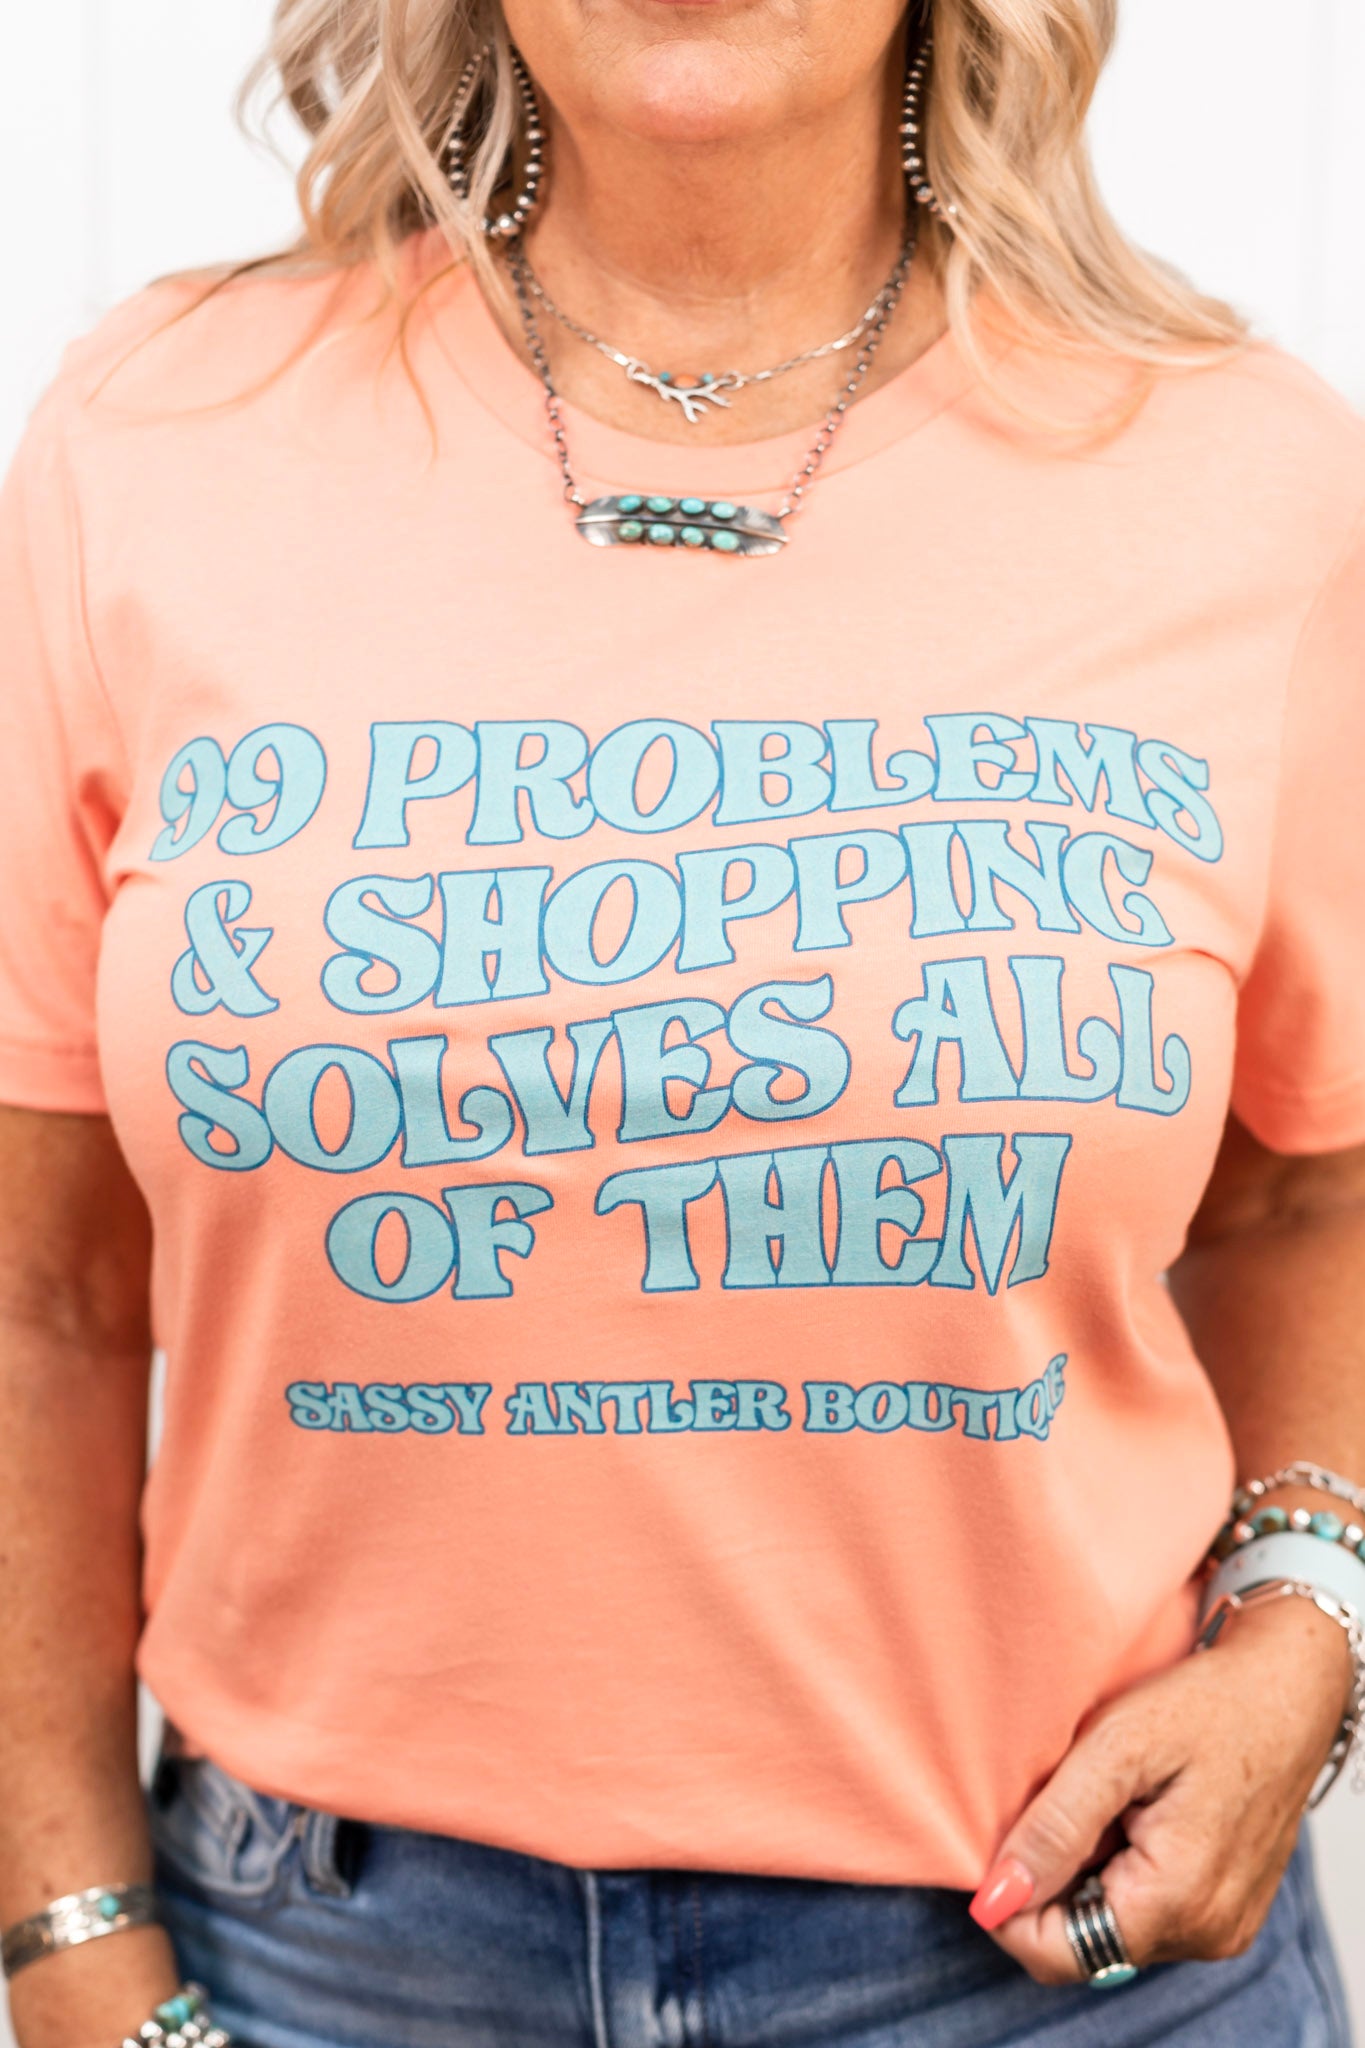 99 Problems & Shopping...